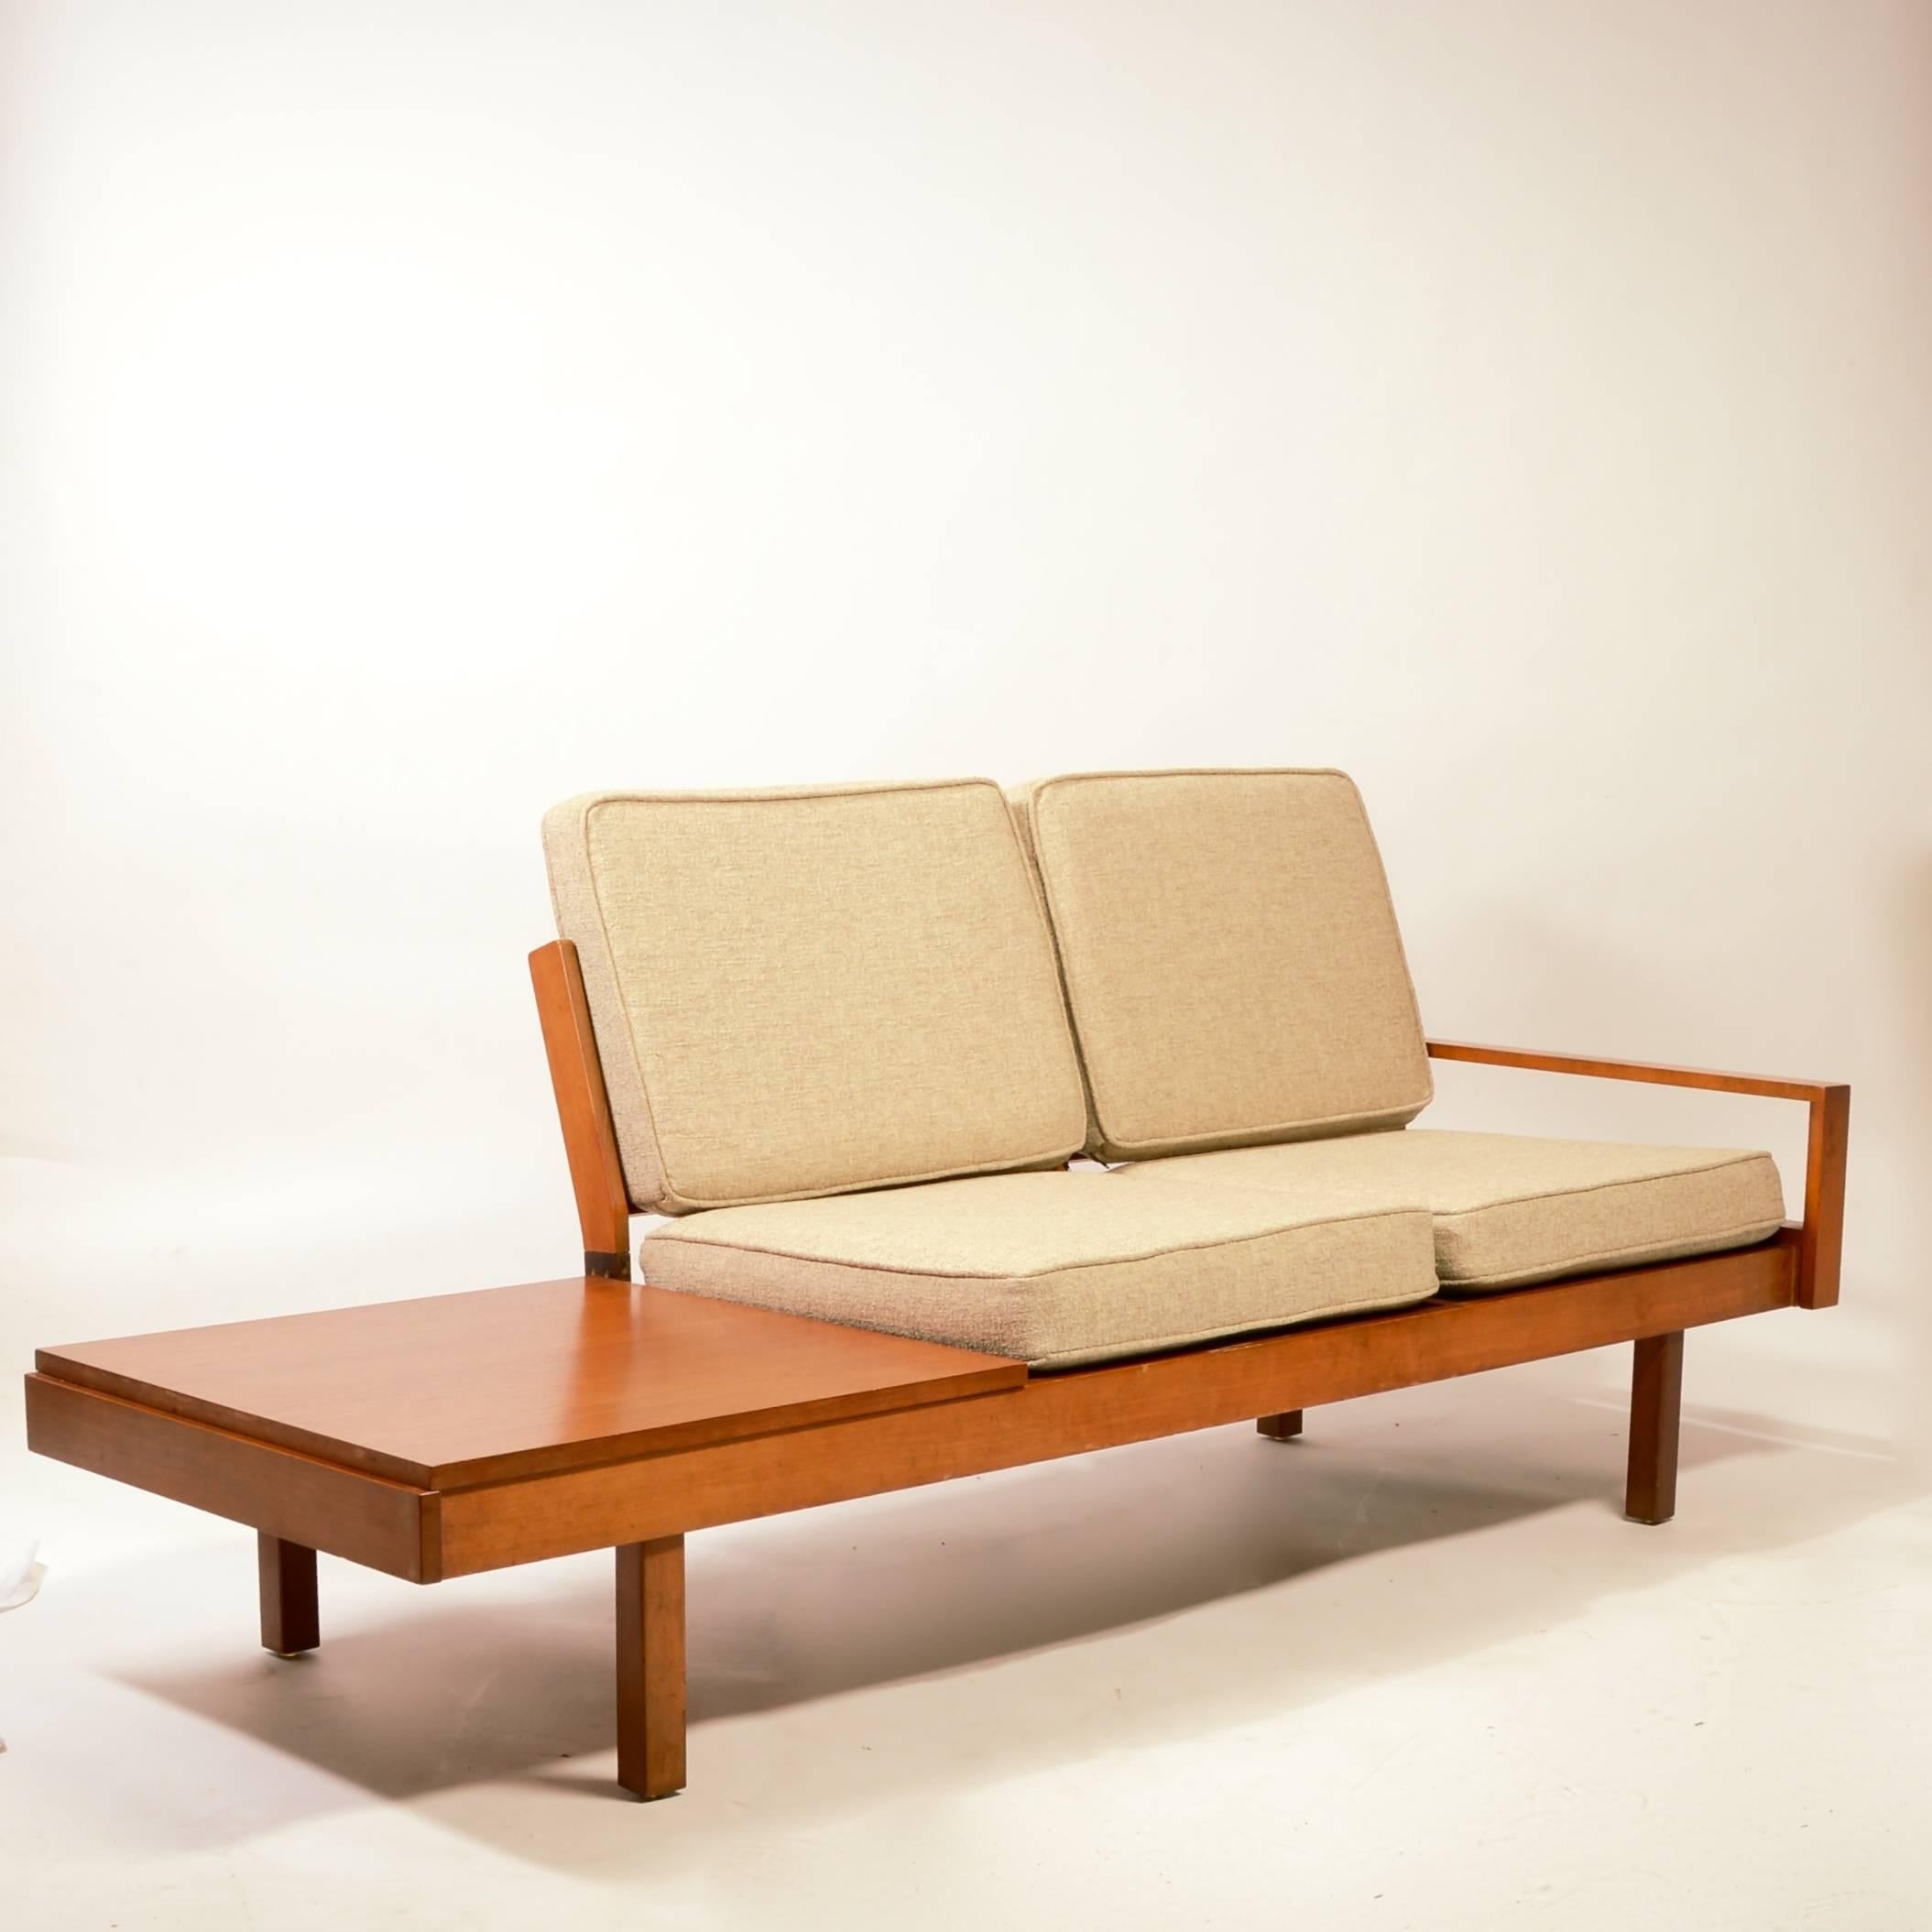 Chair by Martin Borenstein for the Brown & Saltman Modular Living Room System 1